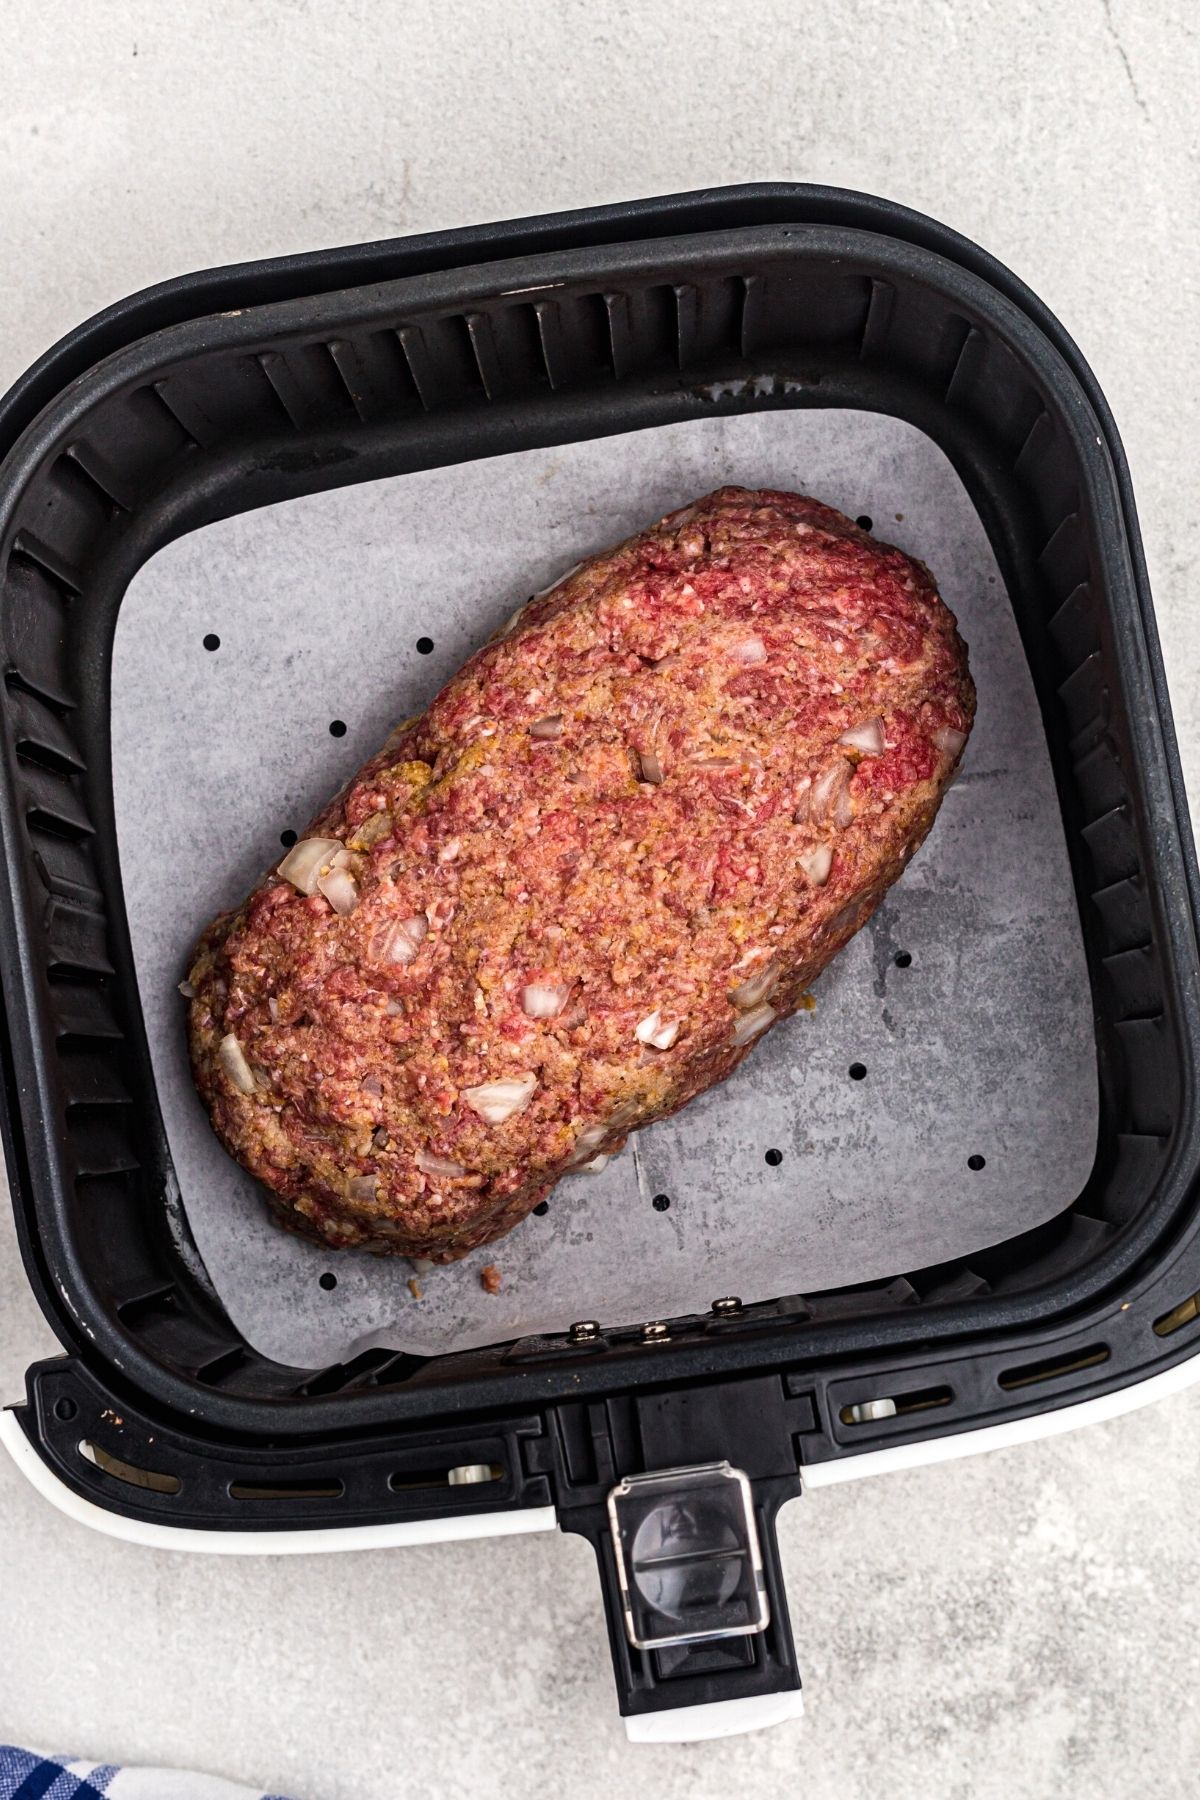 Meat shaped into a loaf in the air fryer basket before being cooked